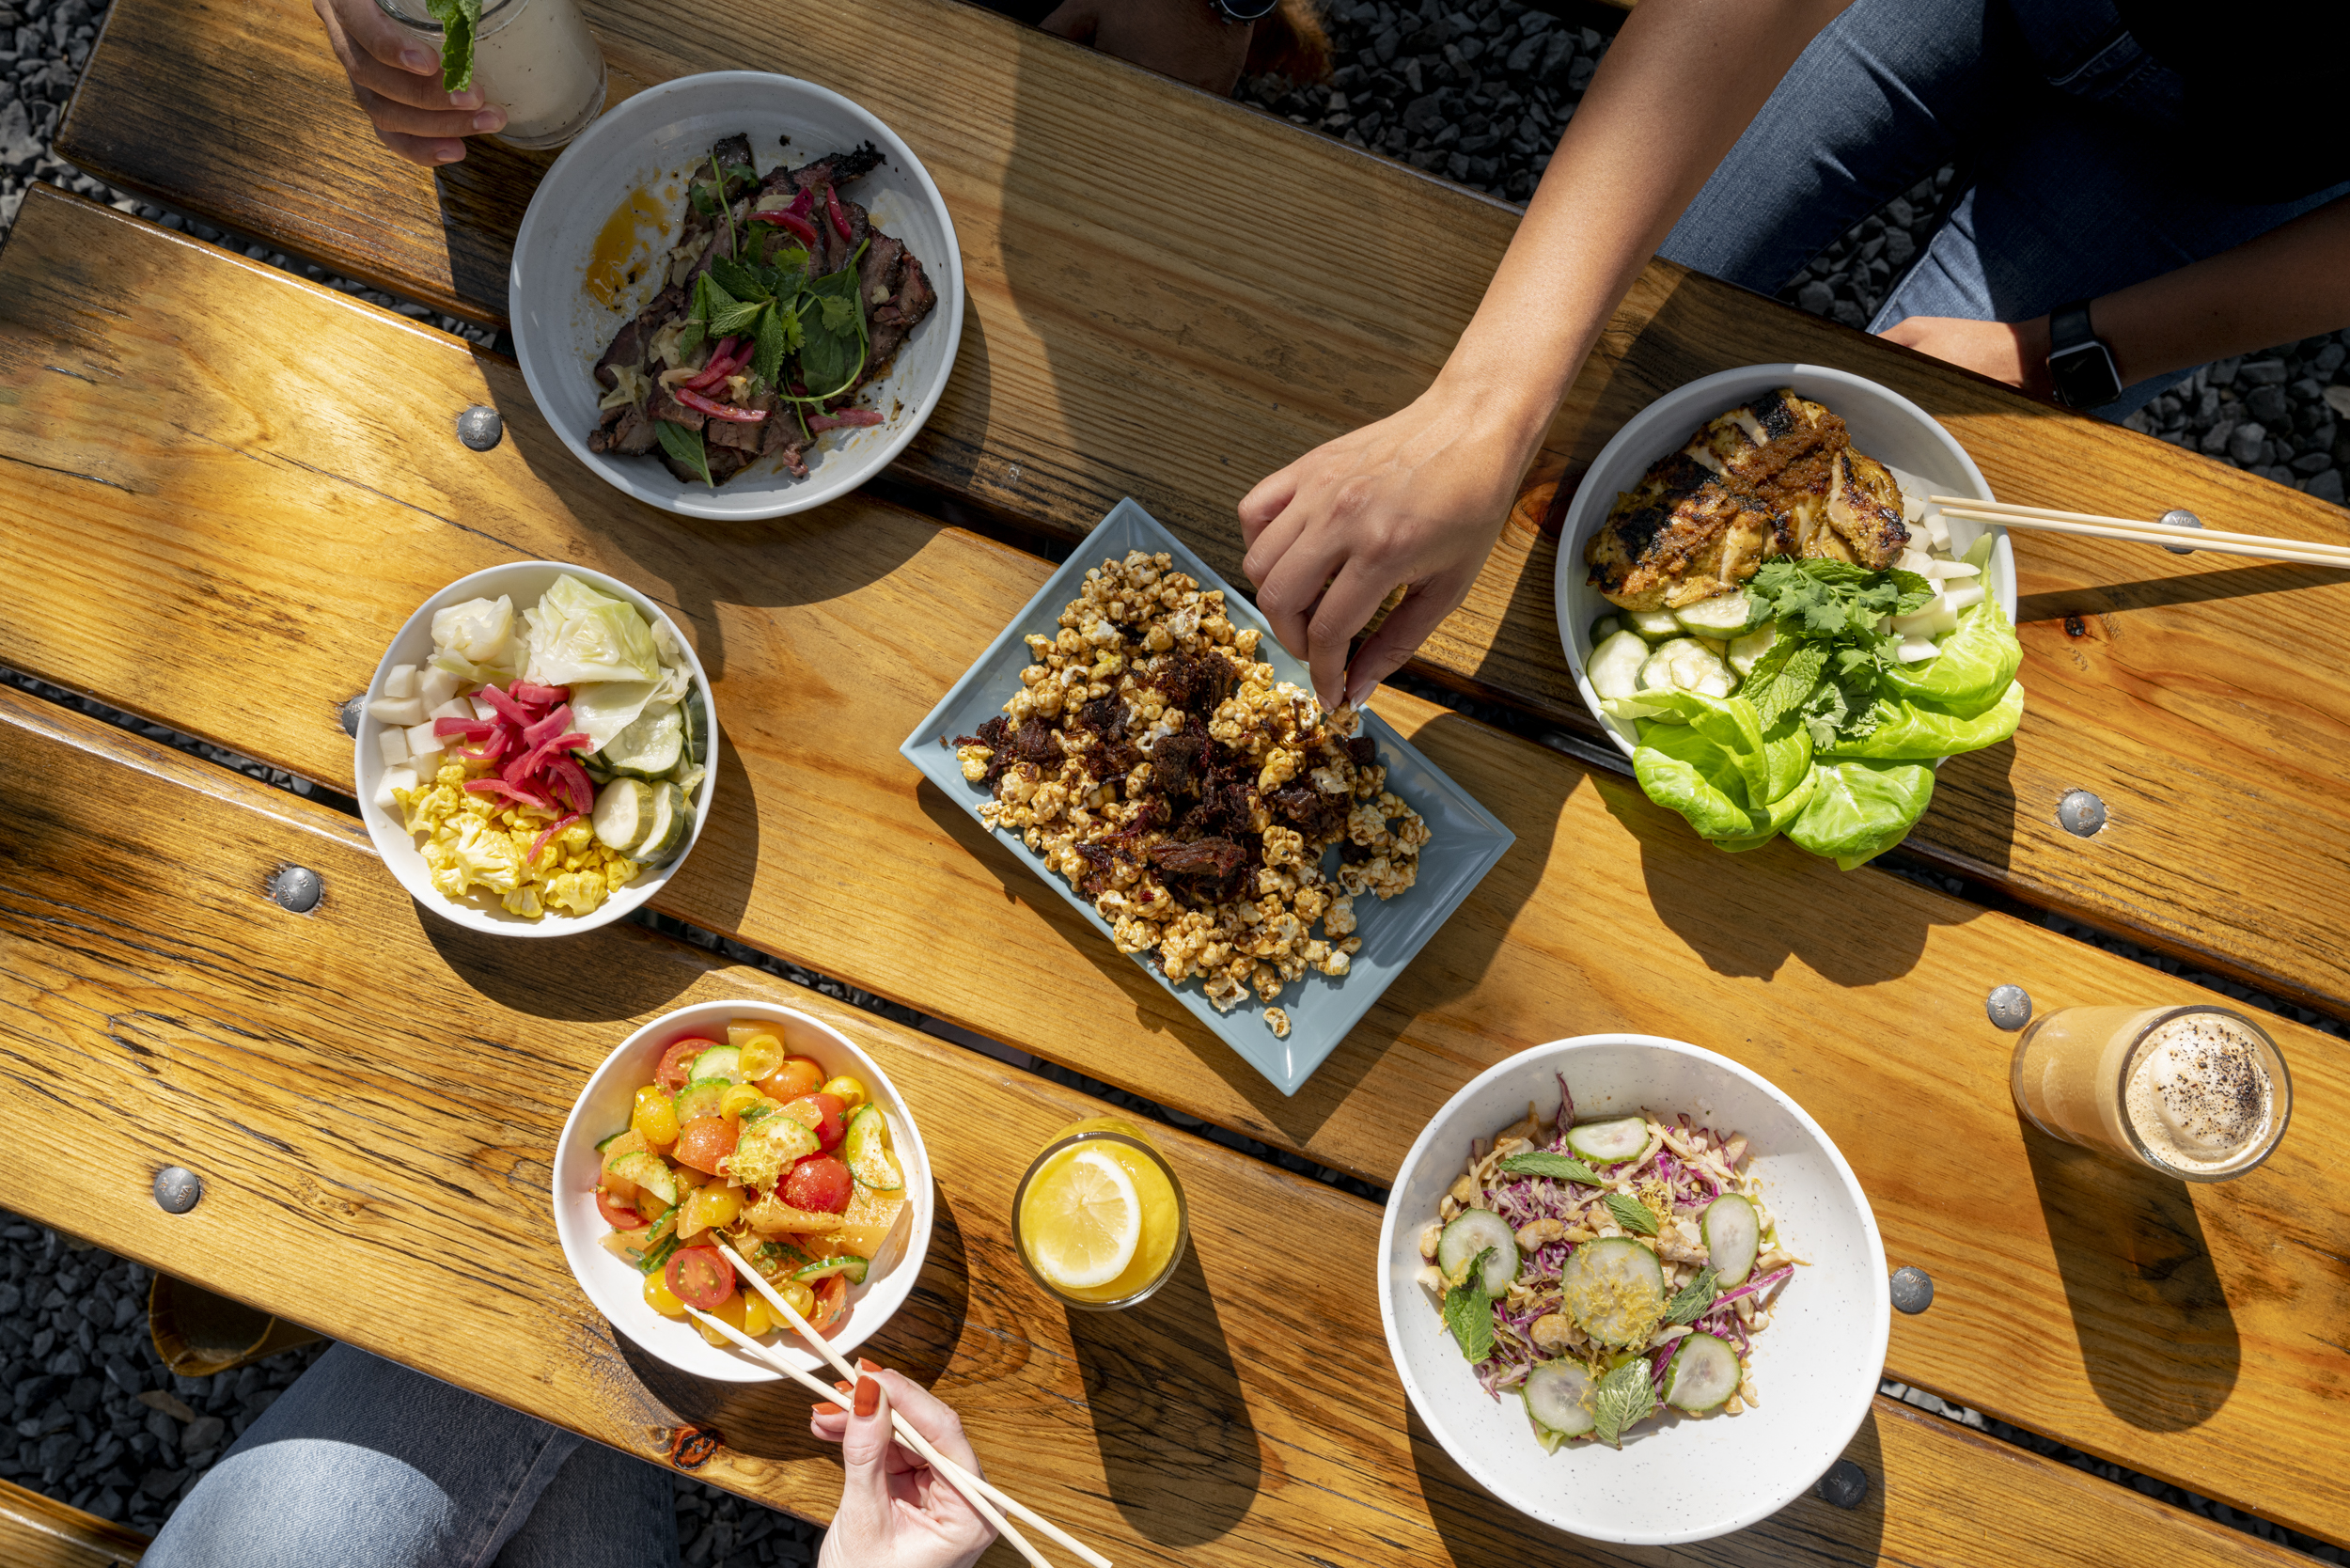 A table spread with Loro Houston’s candied kettle corn with burnt brisket ends, a rice bowl, a cold noodle salad, and slices of beef brisket with chile gastrique and Thai herbs.